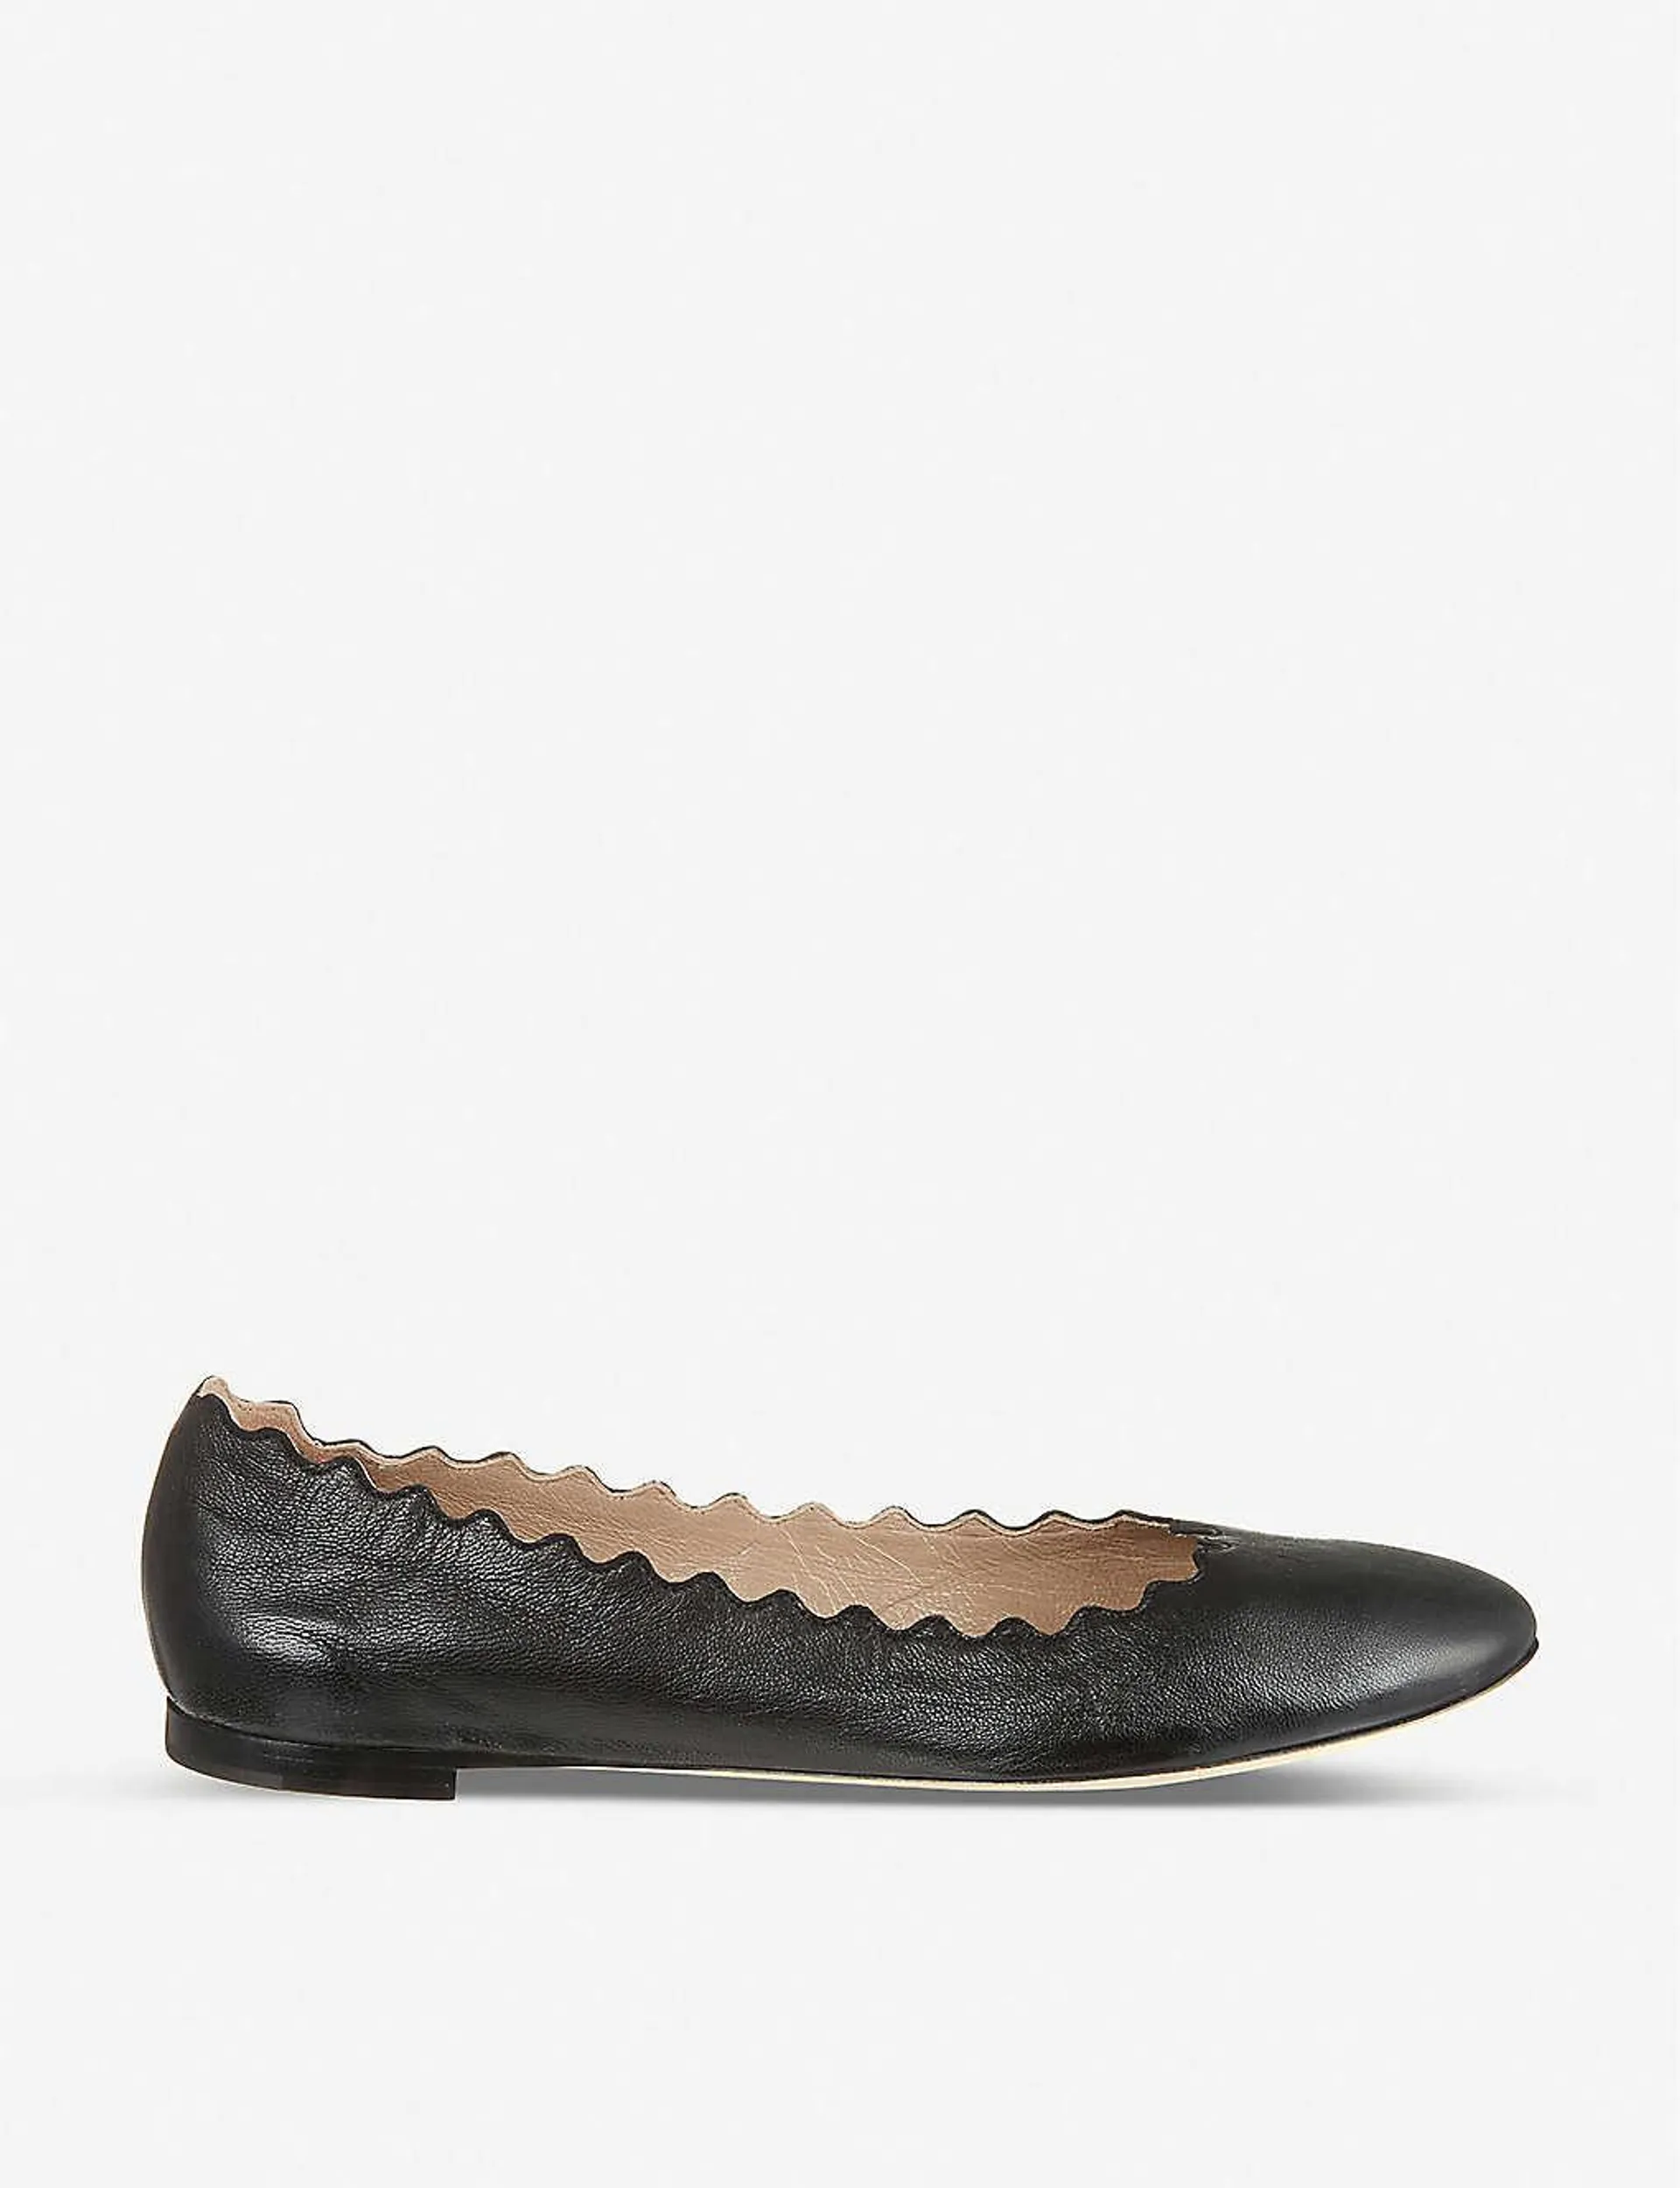 Scallop leather ballet flats